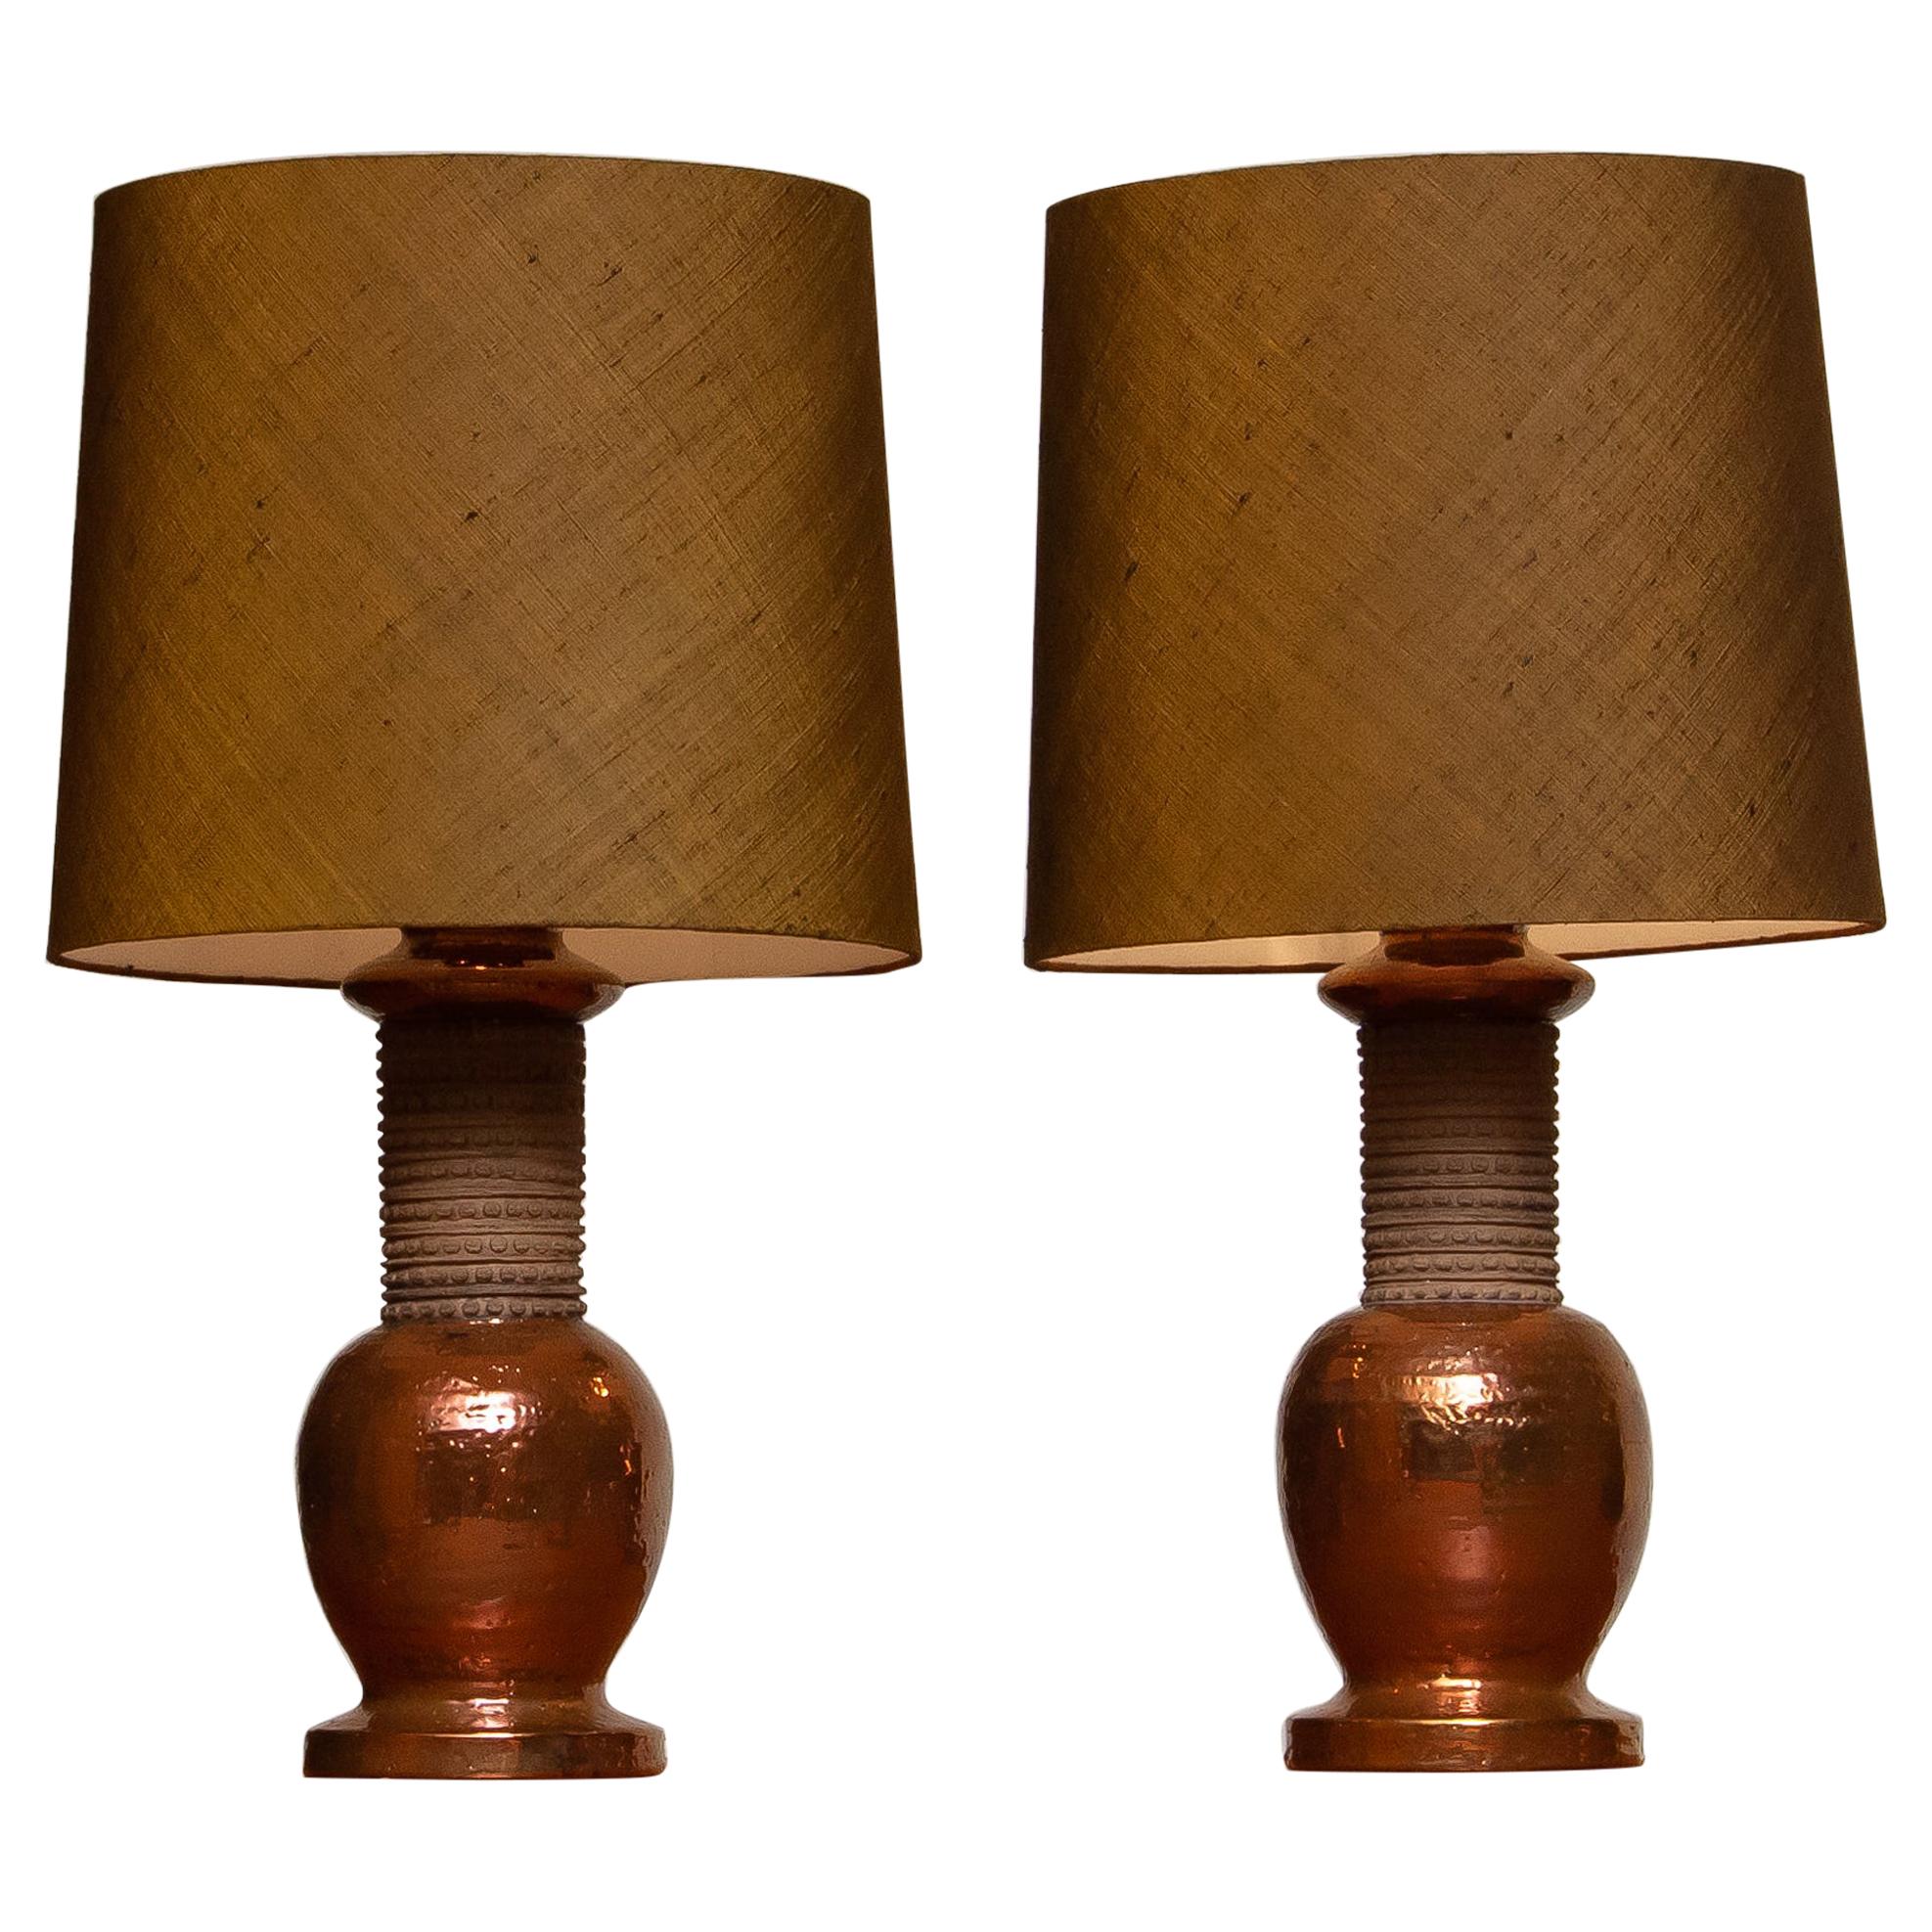 Beautiful set of two large, with copper covered, ceramic table lamps made by Bitossi Italy in the 1960s for Bergboms Sweden.
Both lamps are in excellent condition and technically 100%. The fitting are for a screw bulb size E27 E28 and suit 110 and